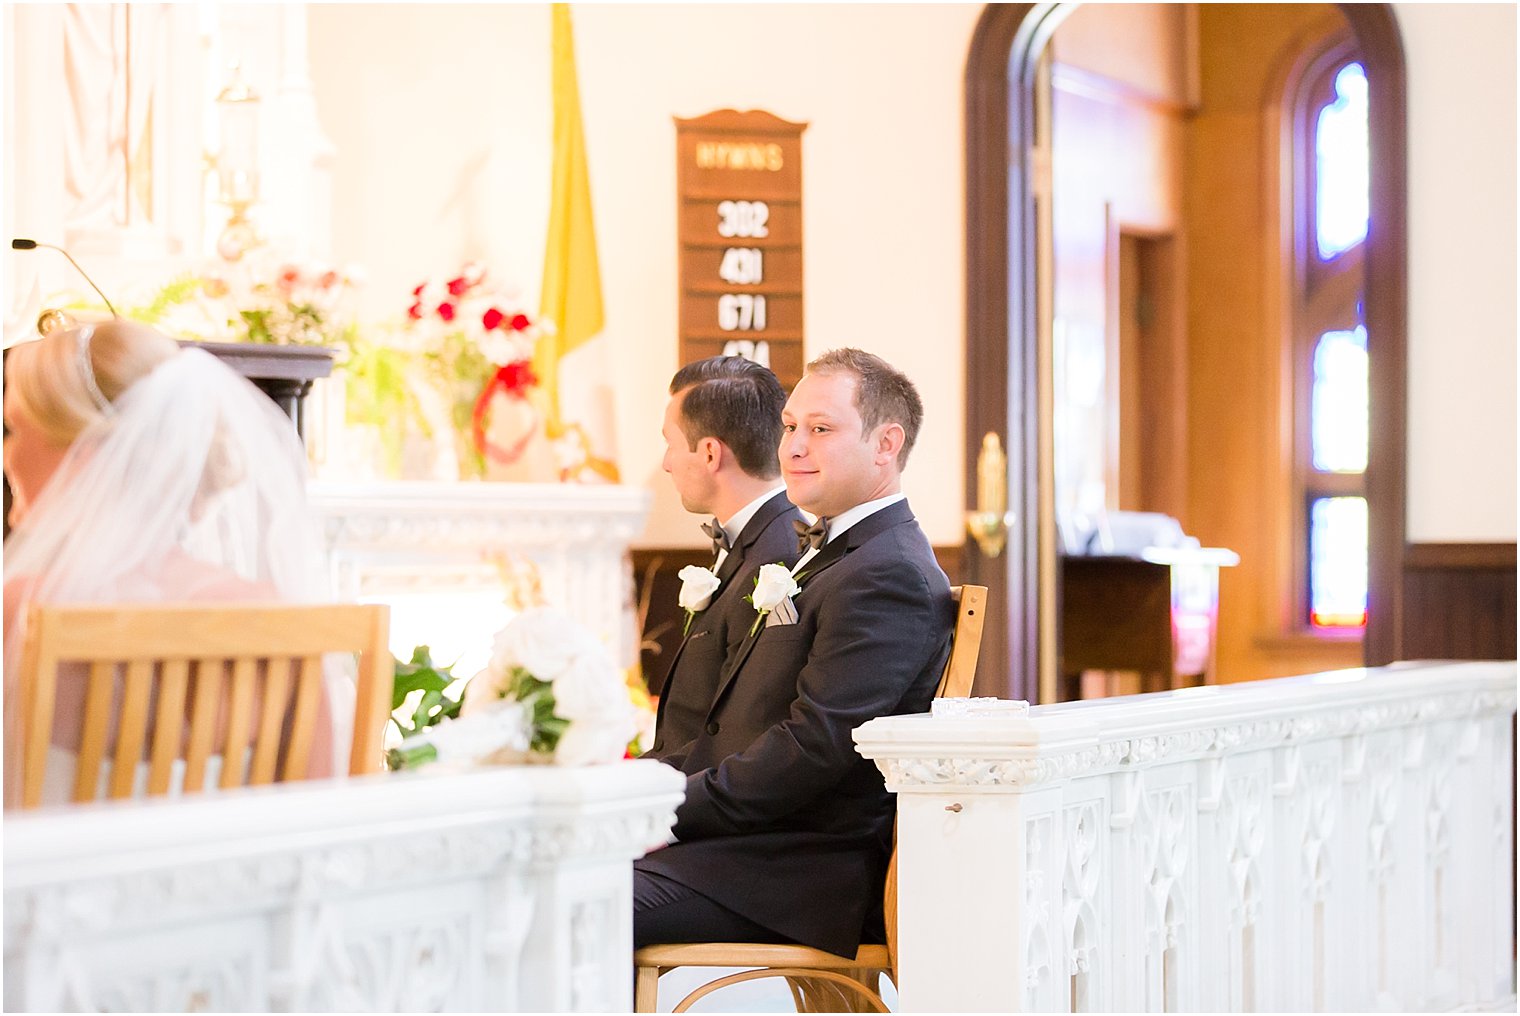 Wedding Ceremony at St. Peter's Church, Point Pleasant